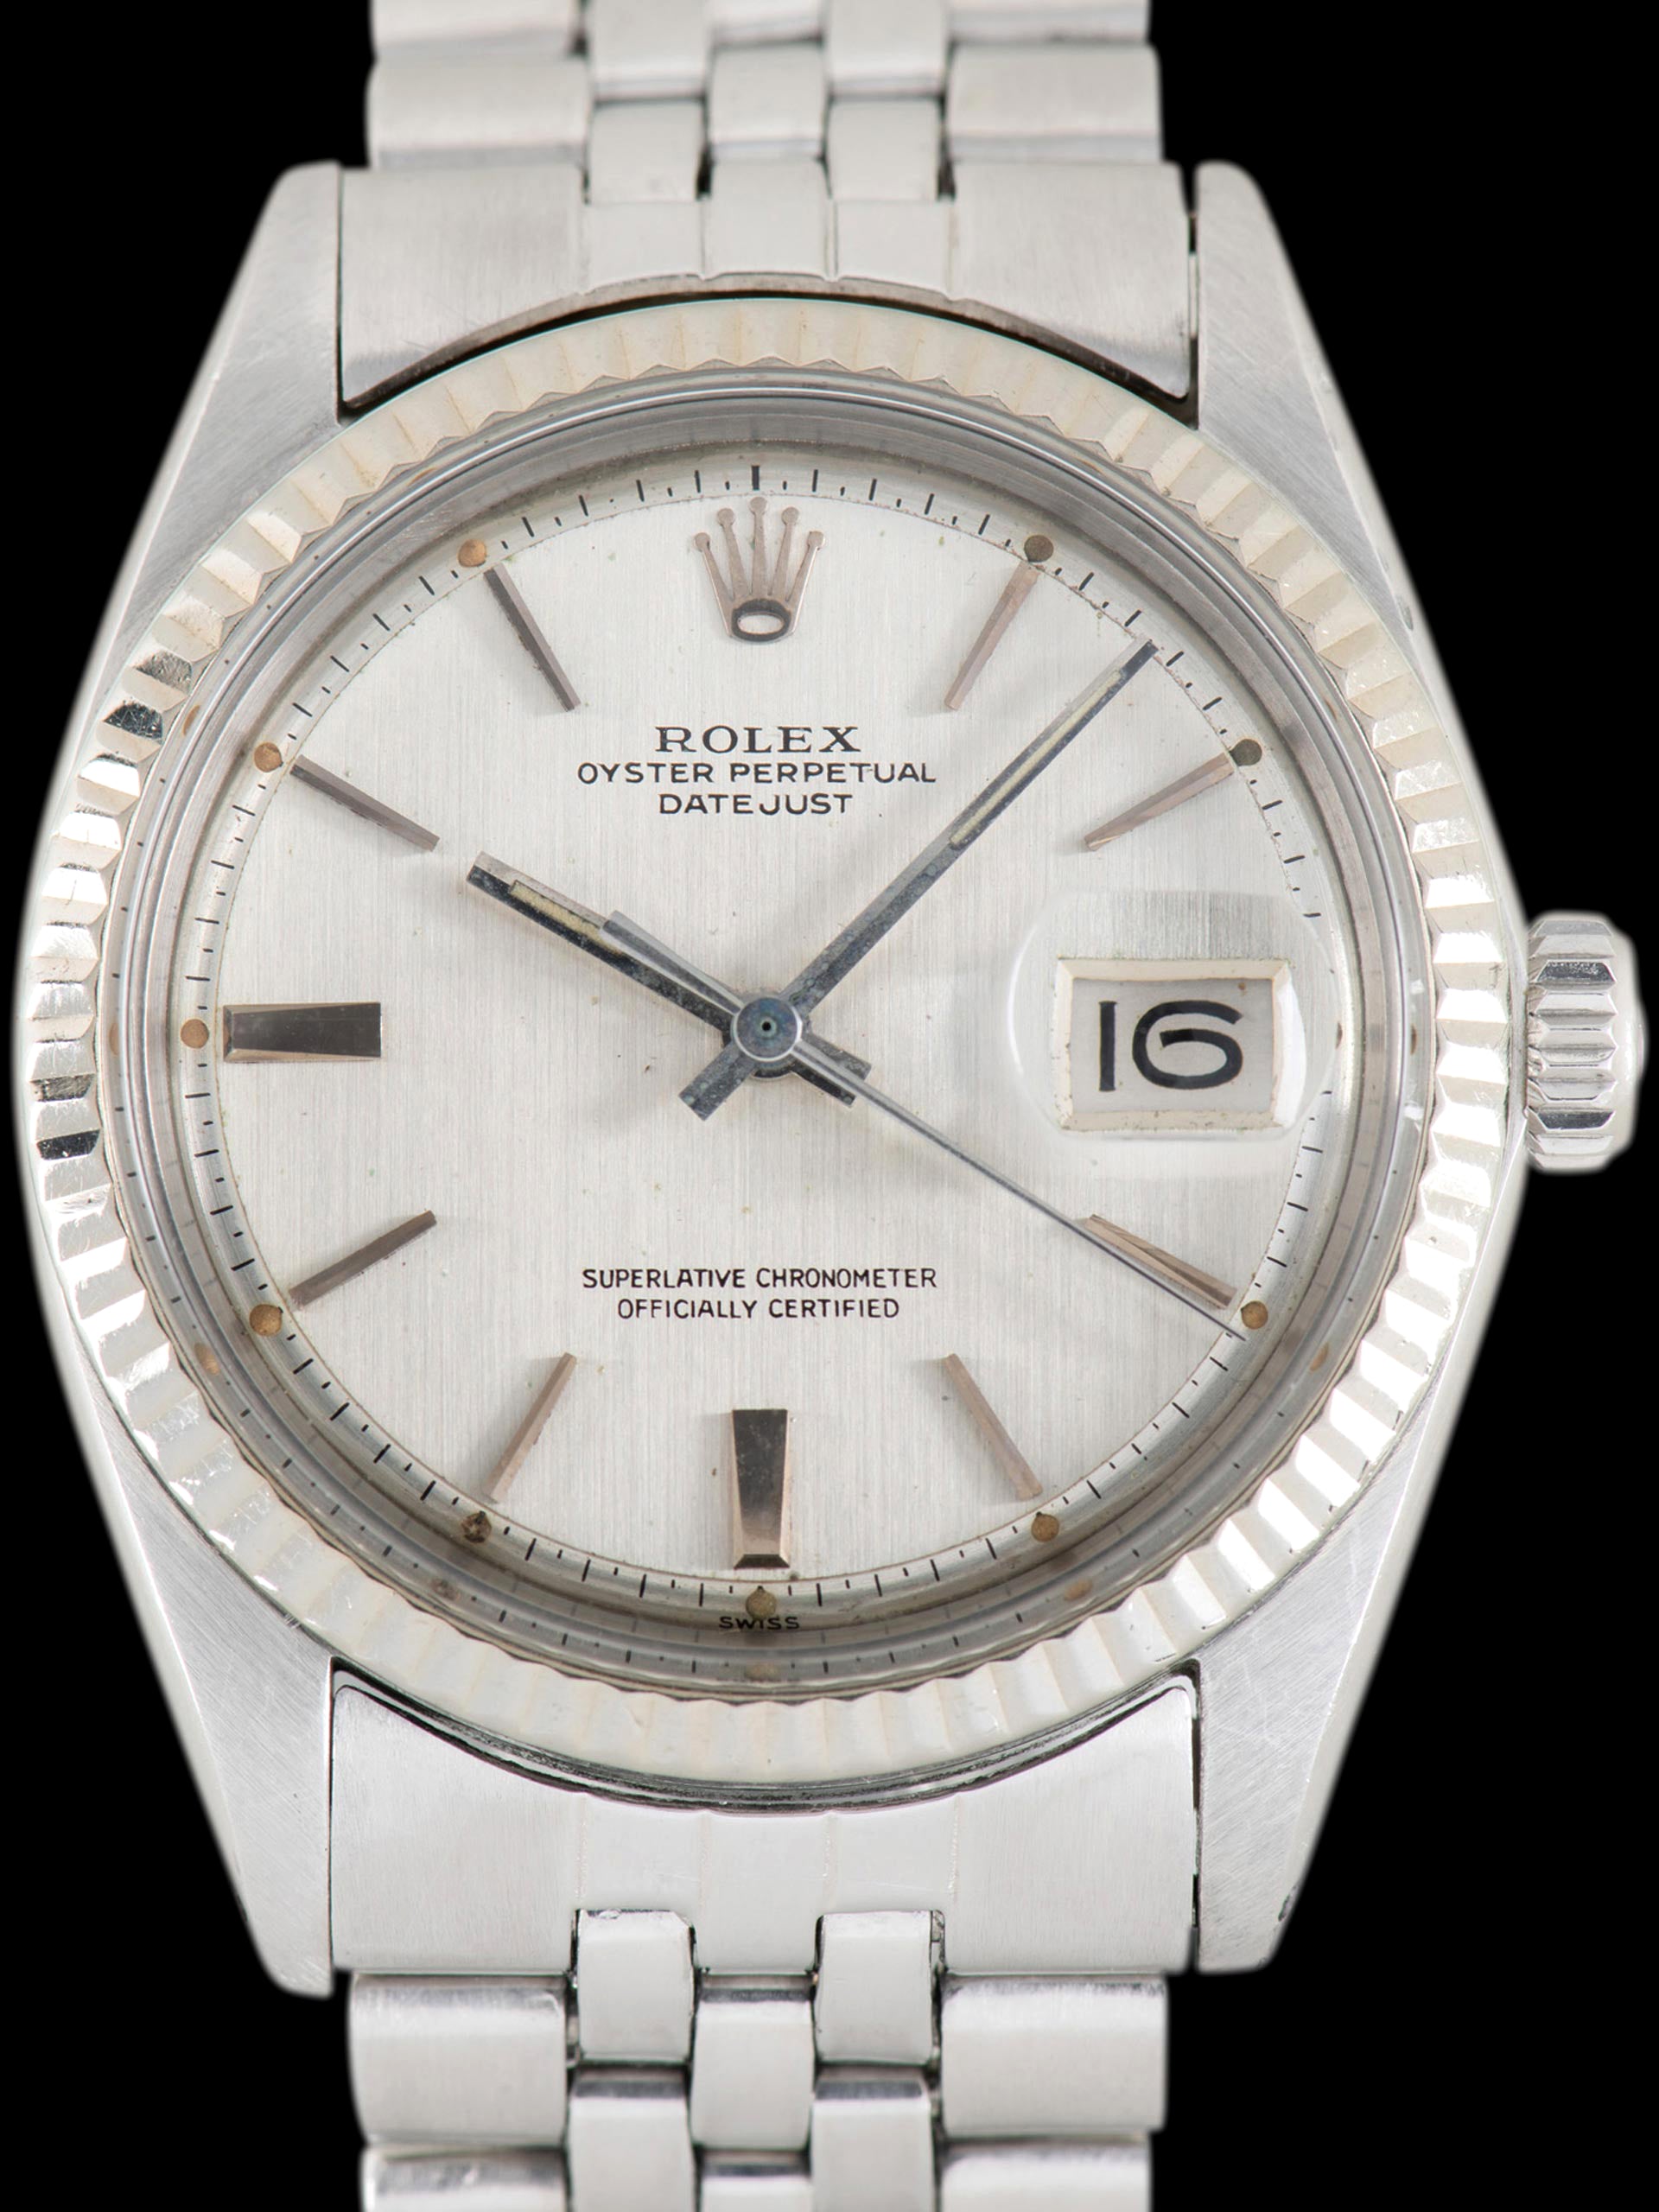 1964 Rolex Datejust (Ref. 1601) "Swiss Only" Brushed-Silver Doorstop Dial